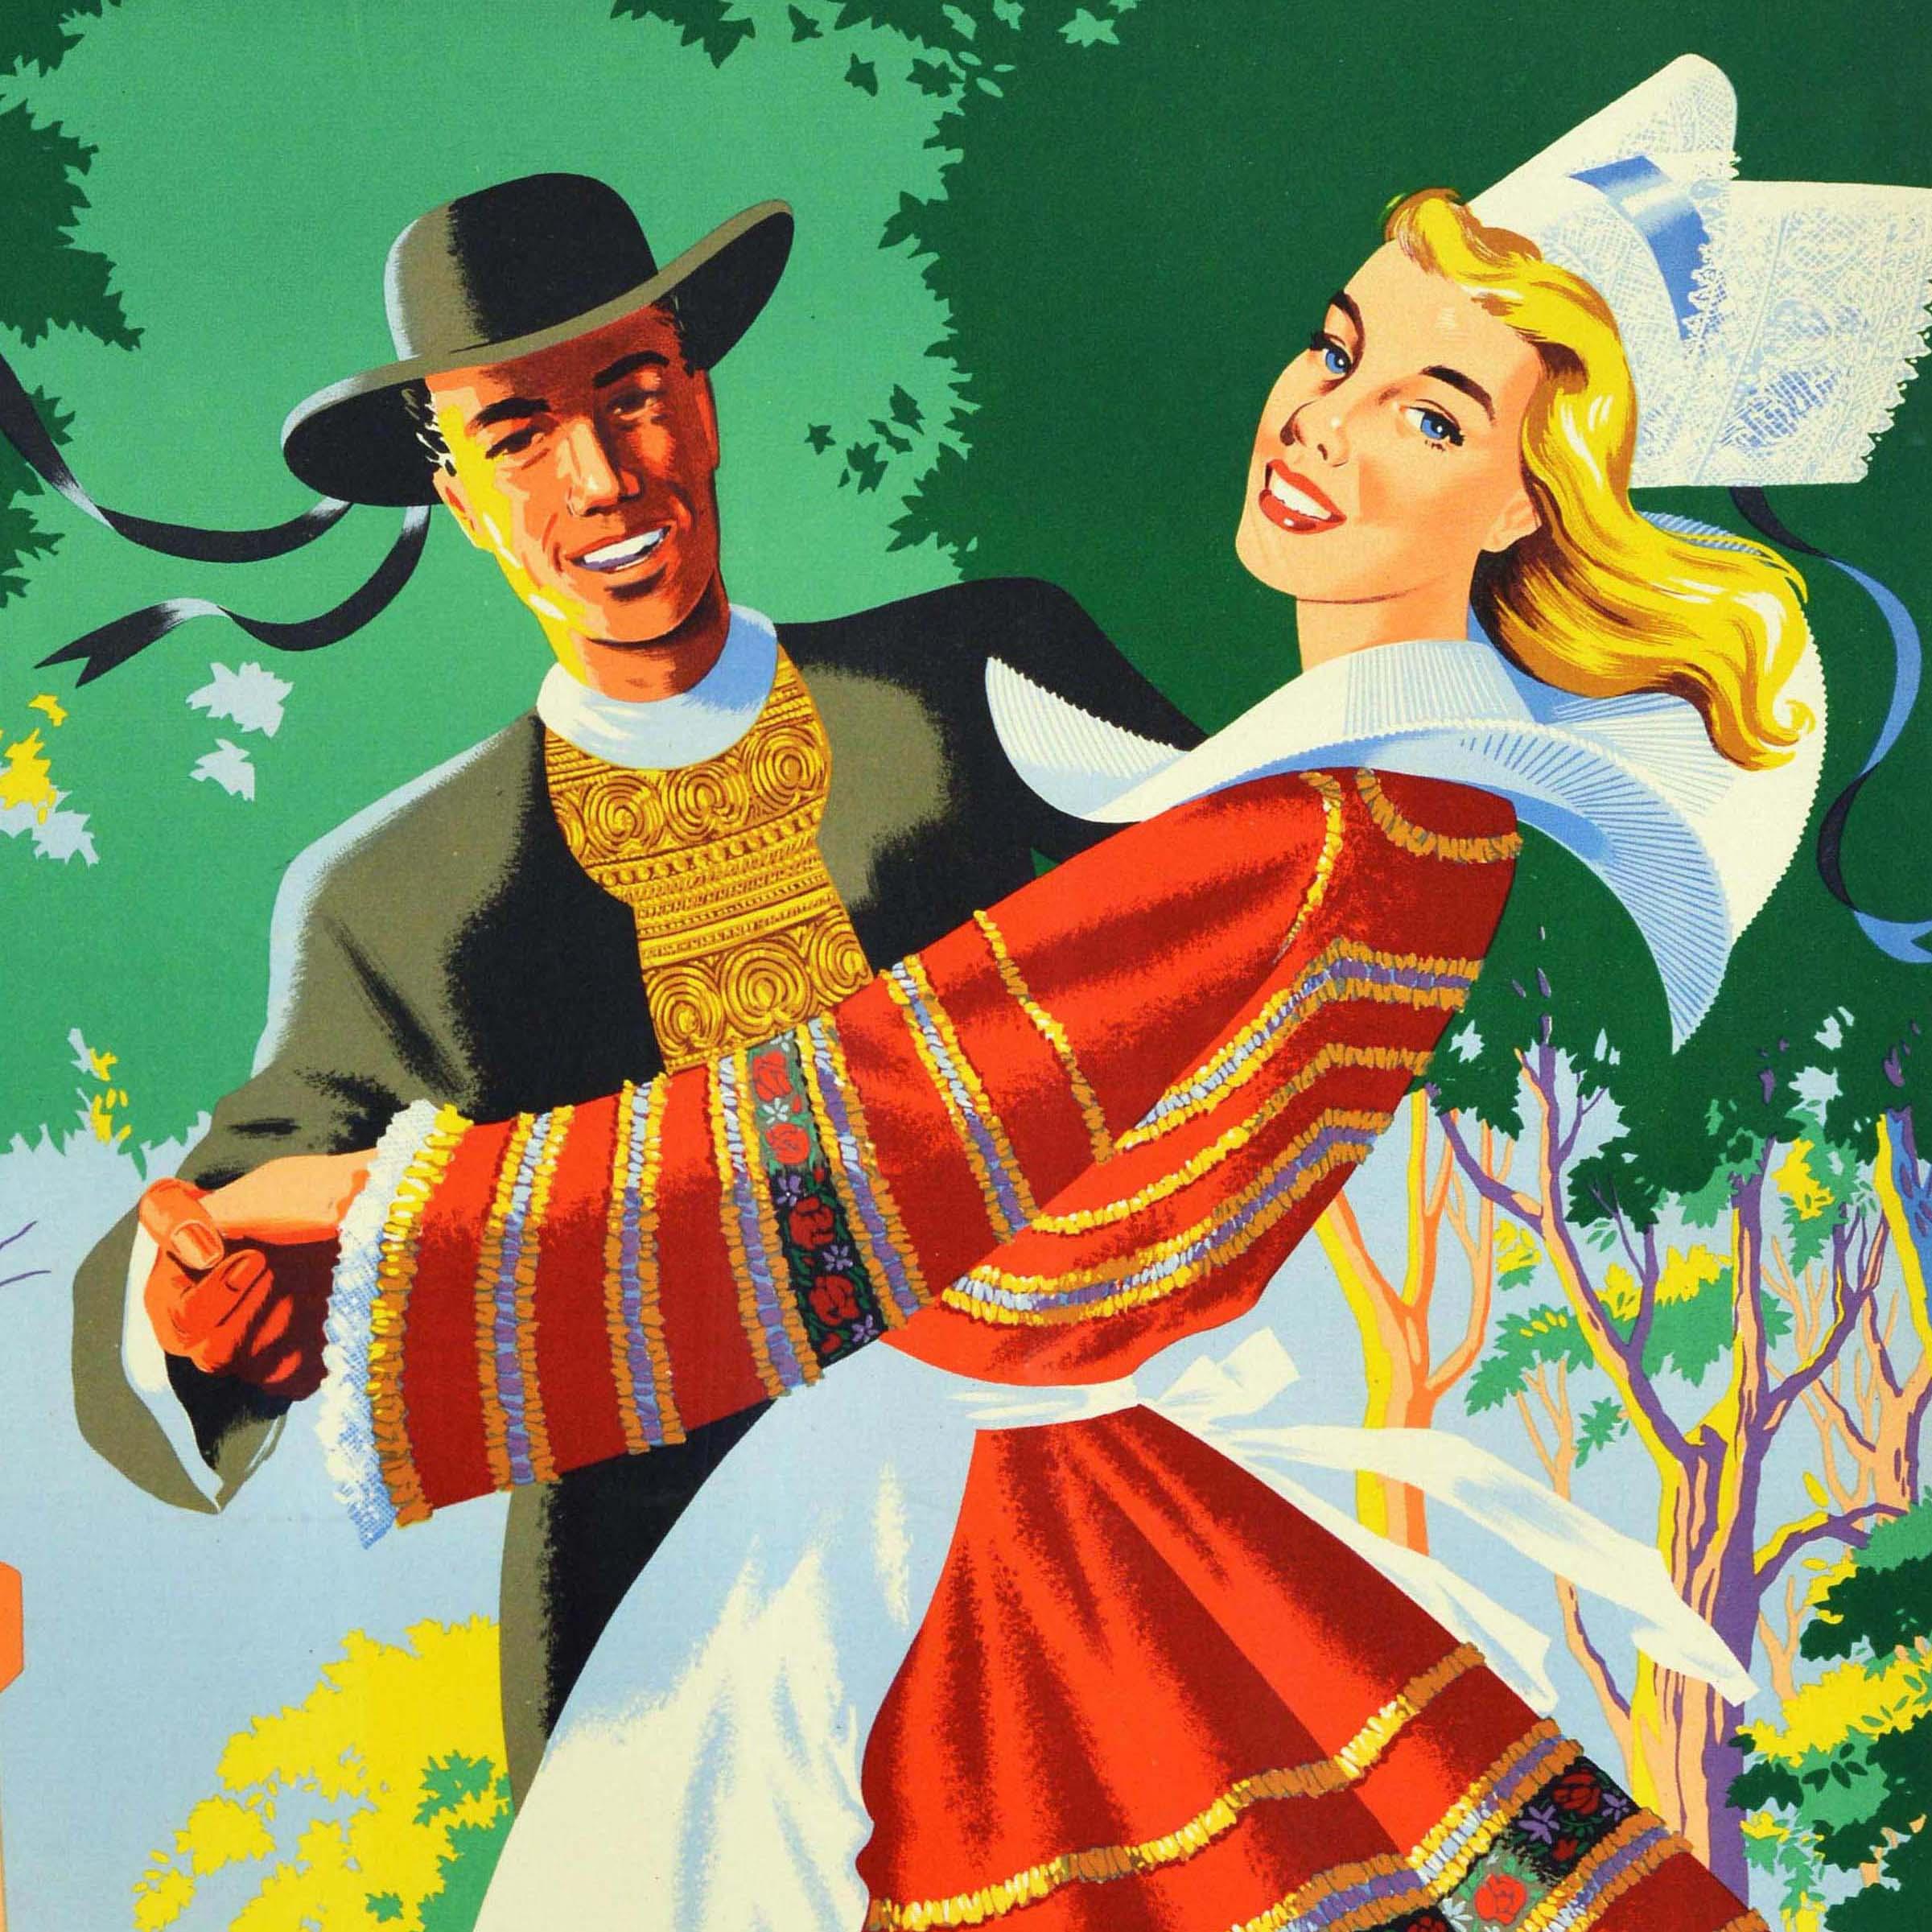 Original vintage travel for Jersey The Nearest The Continent Resort featuring a colourful image of couples dancing in traditional dresses and suits with flowing ribbons on their hats, smiling at the viewer with trees and an old tower in front of a